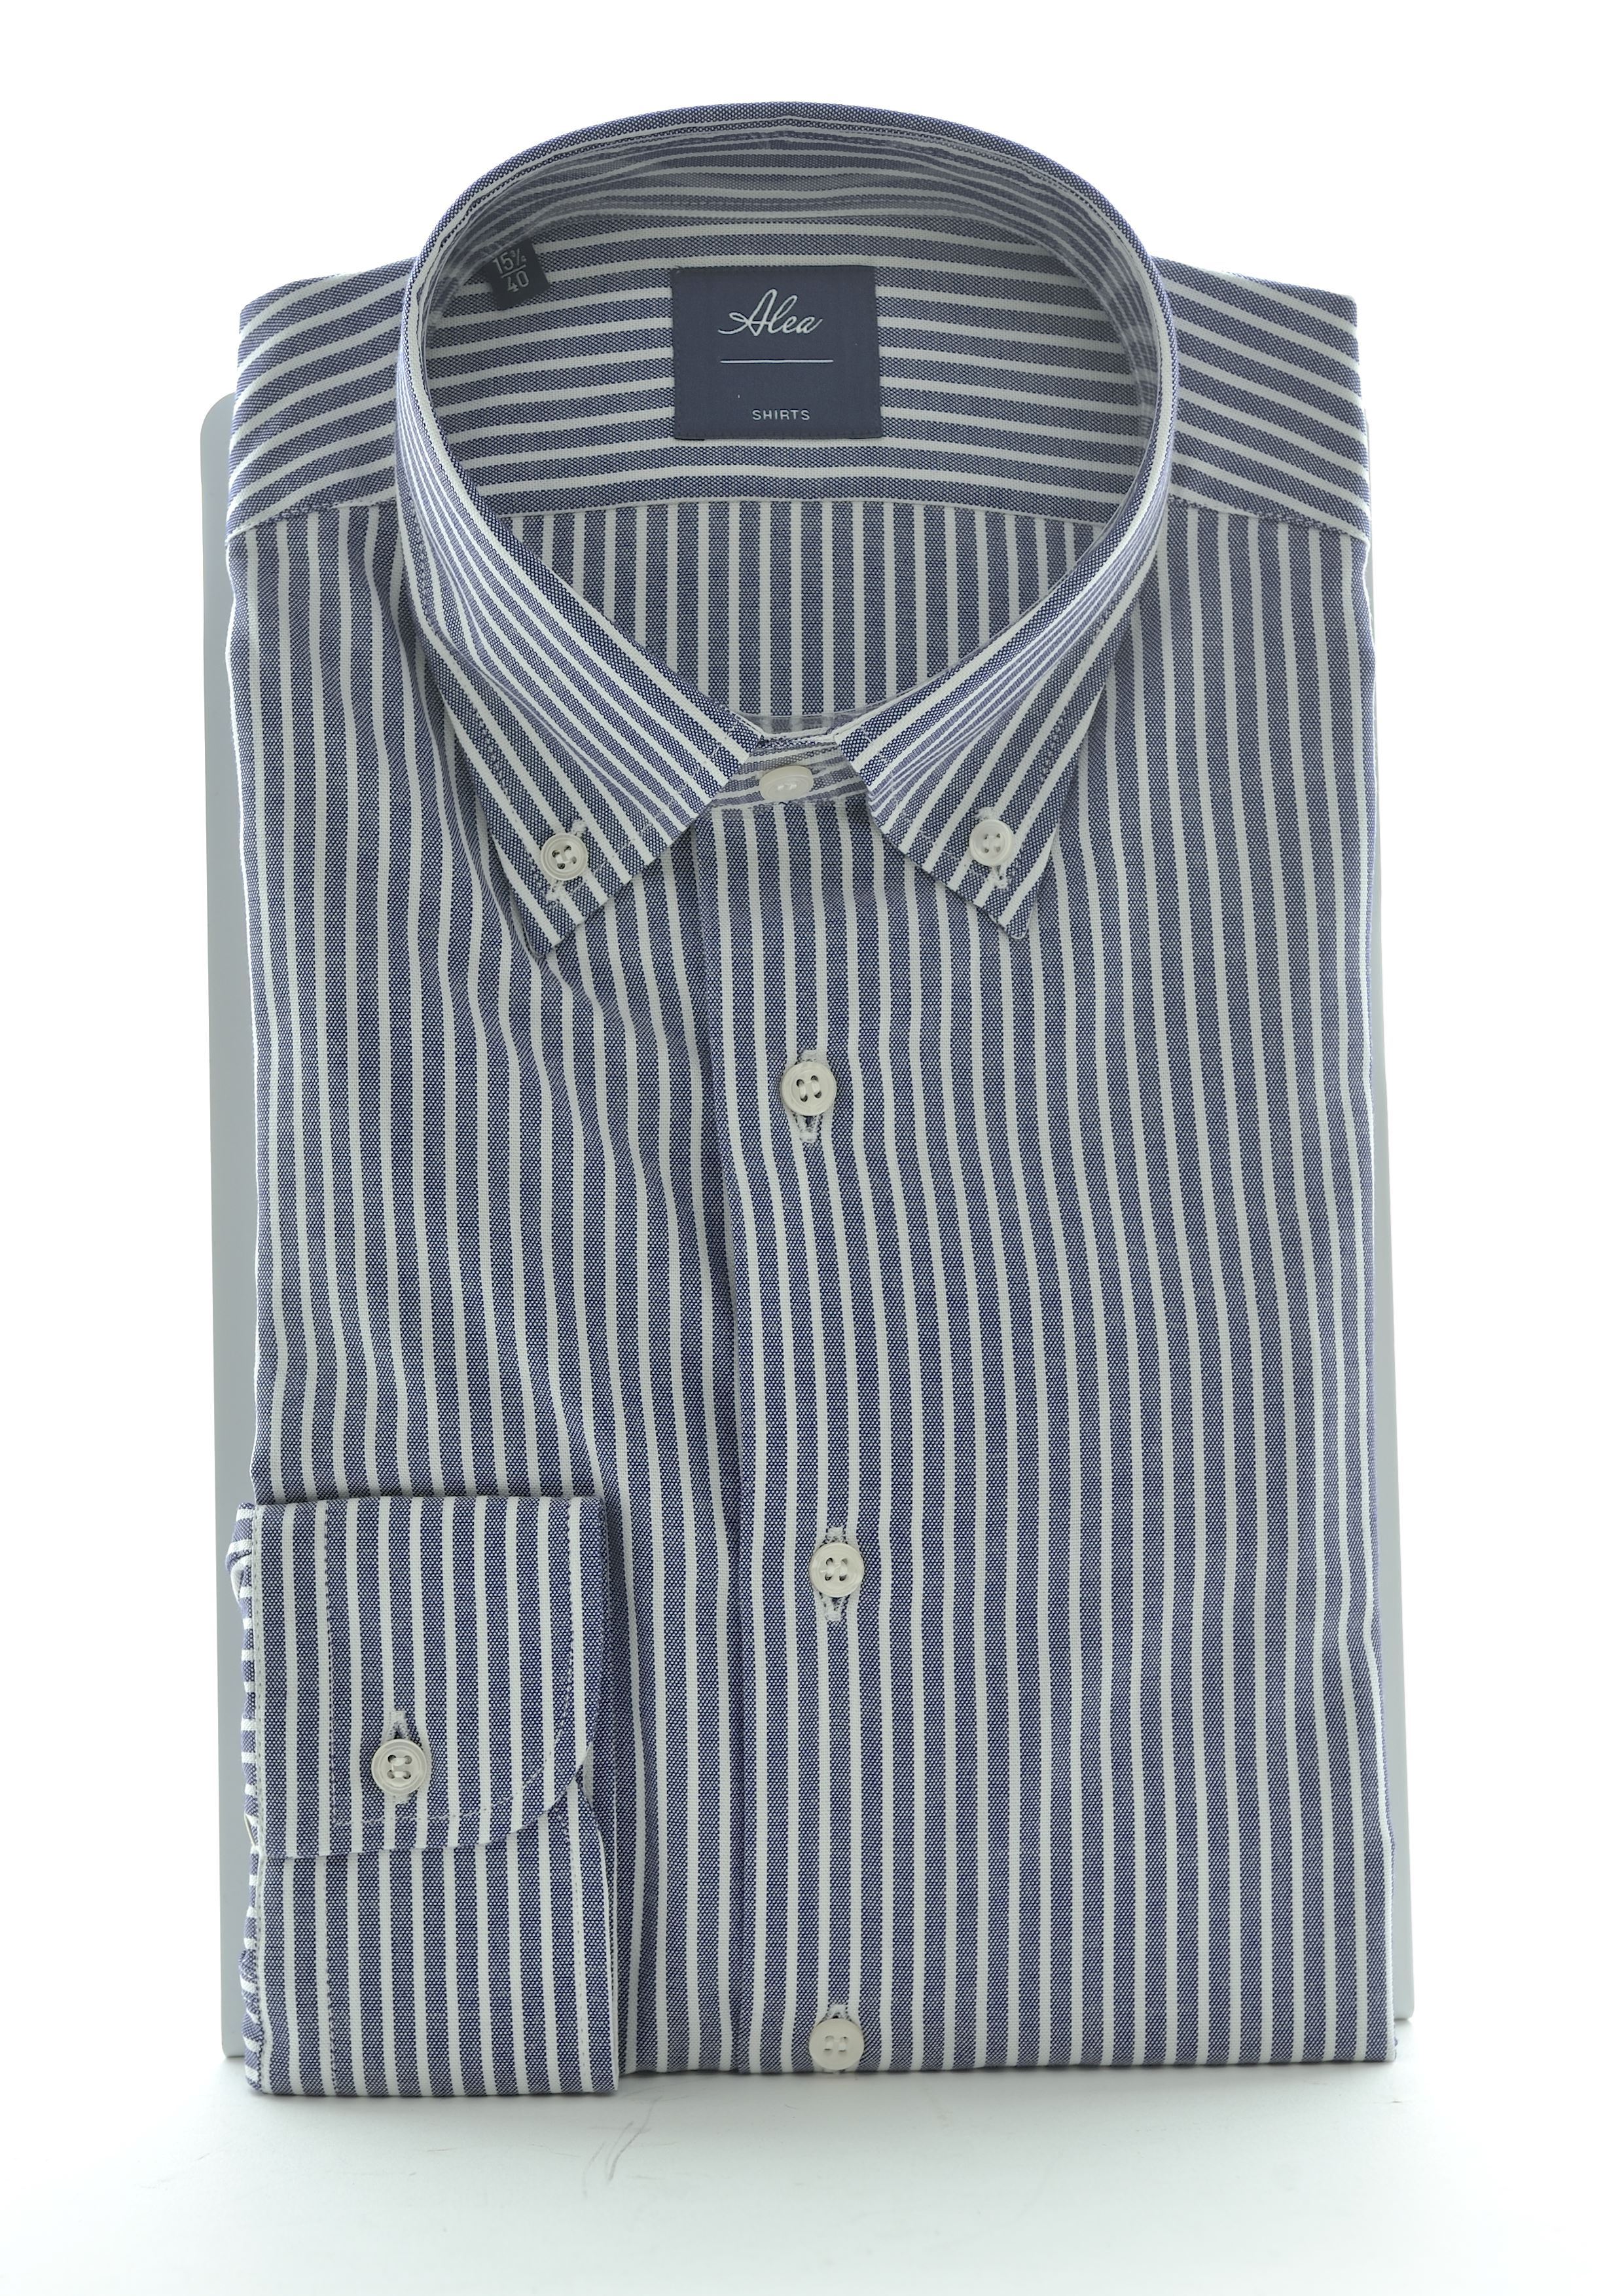 Picture of Striped shirt with blue background